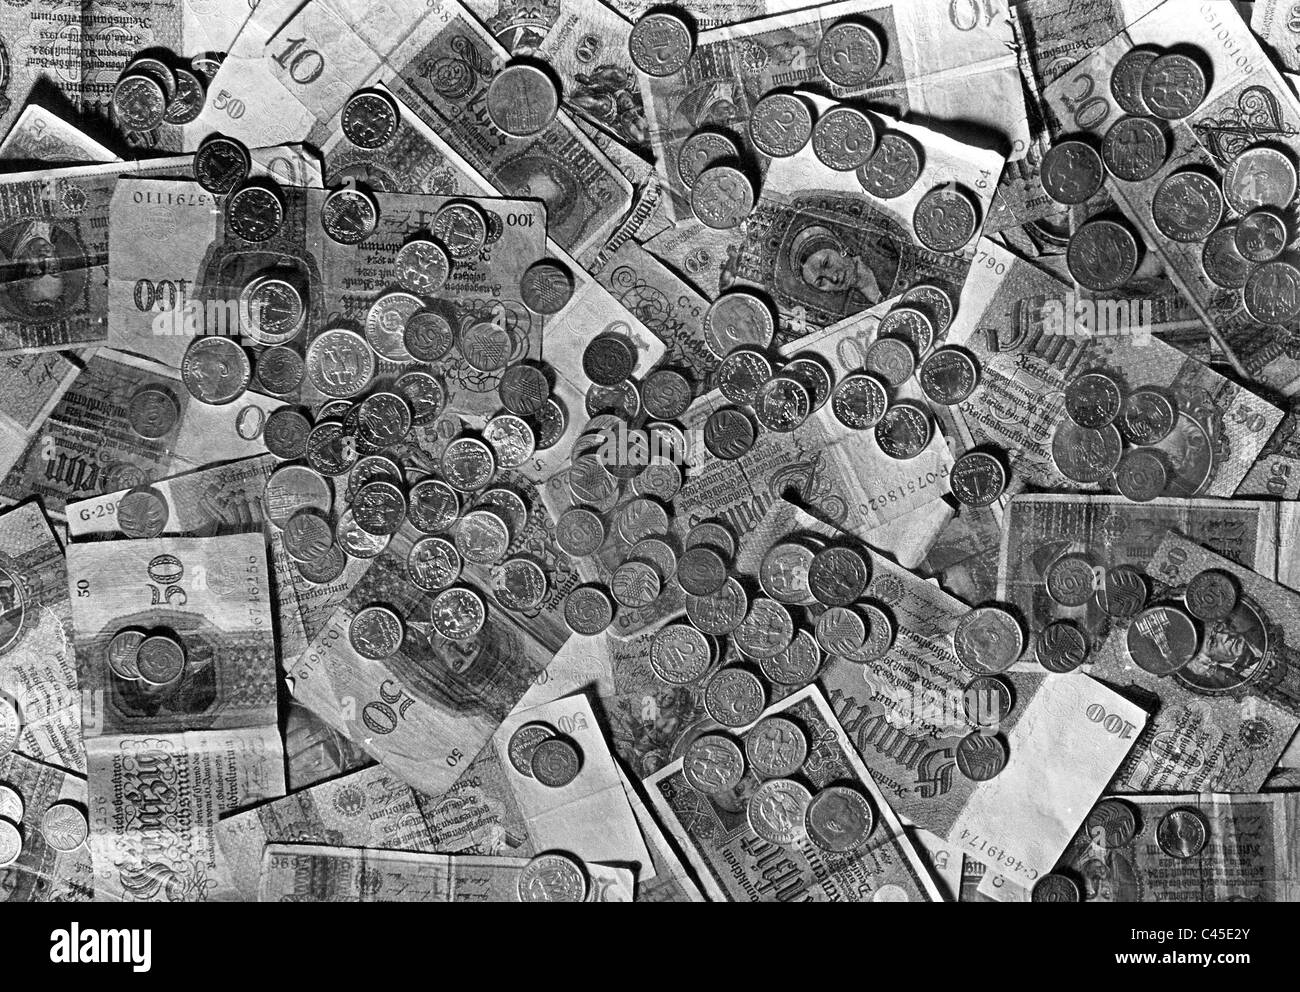 German rag money and coins, 1920's Stock Photo